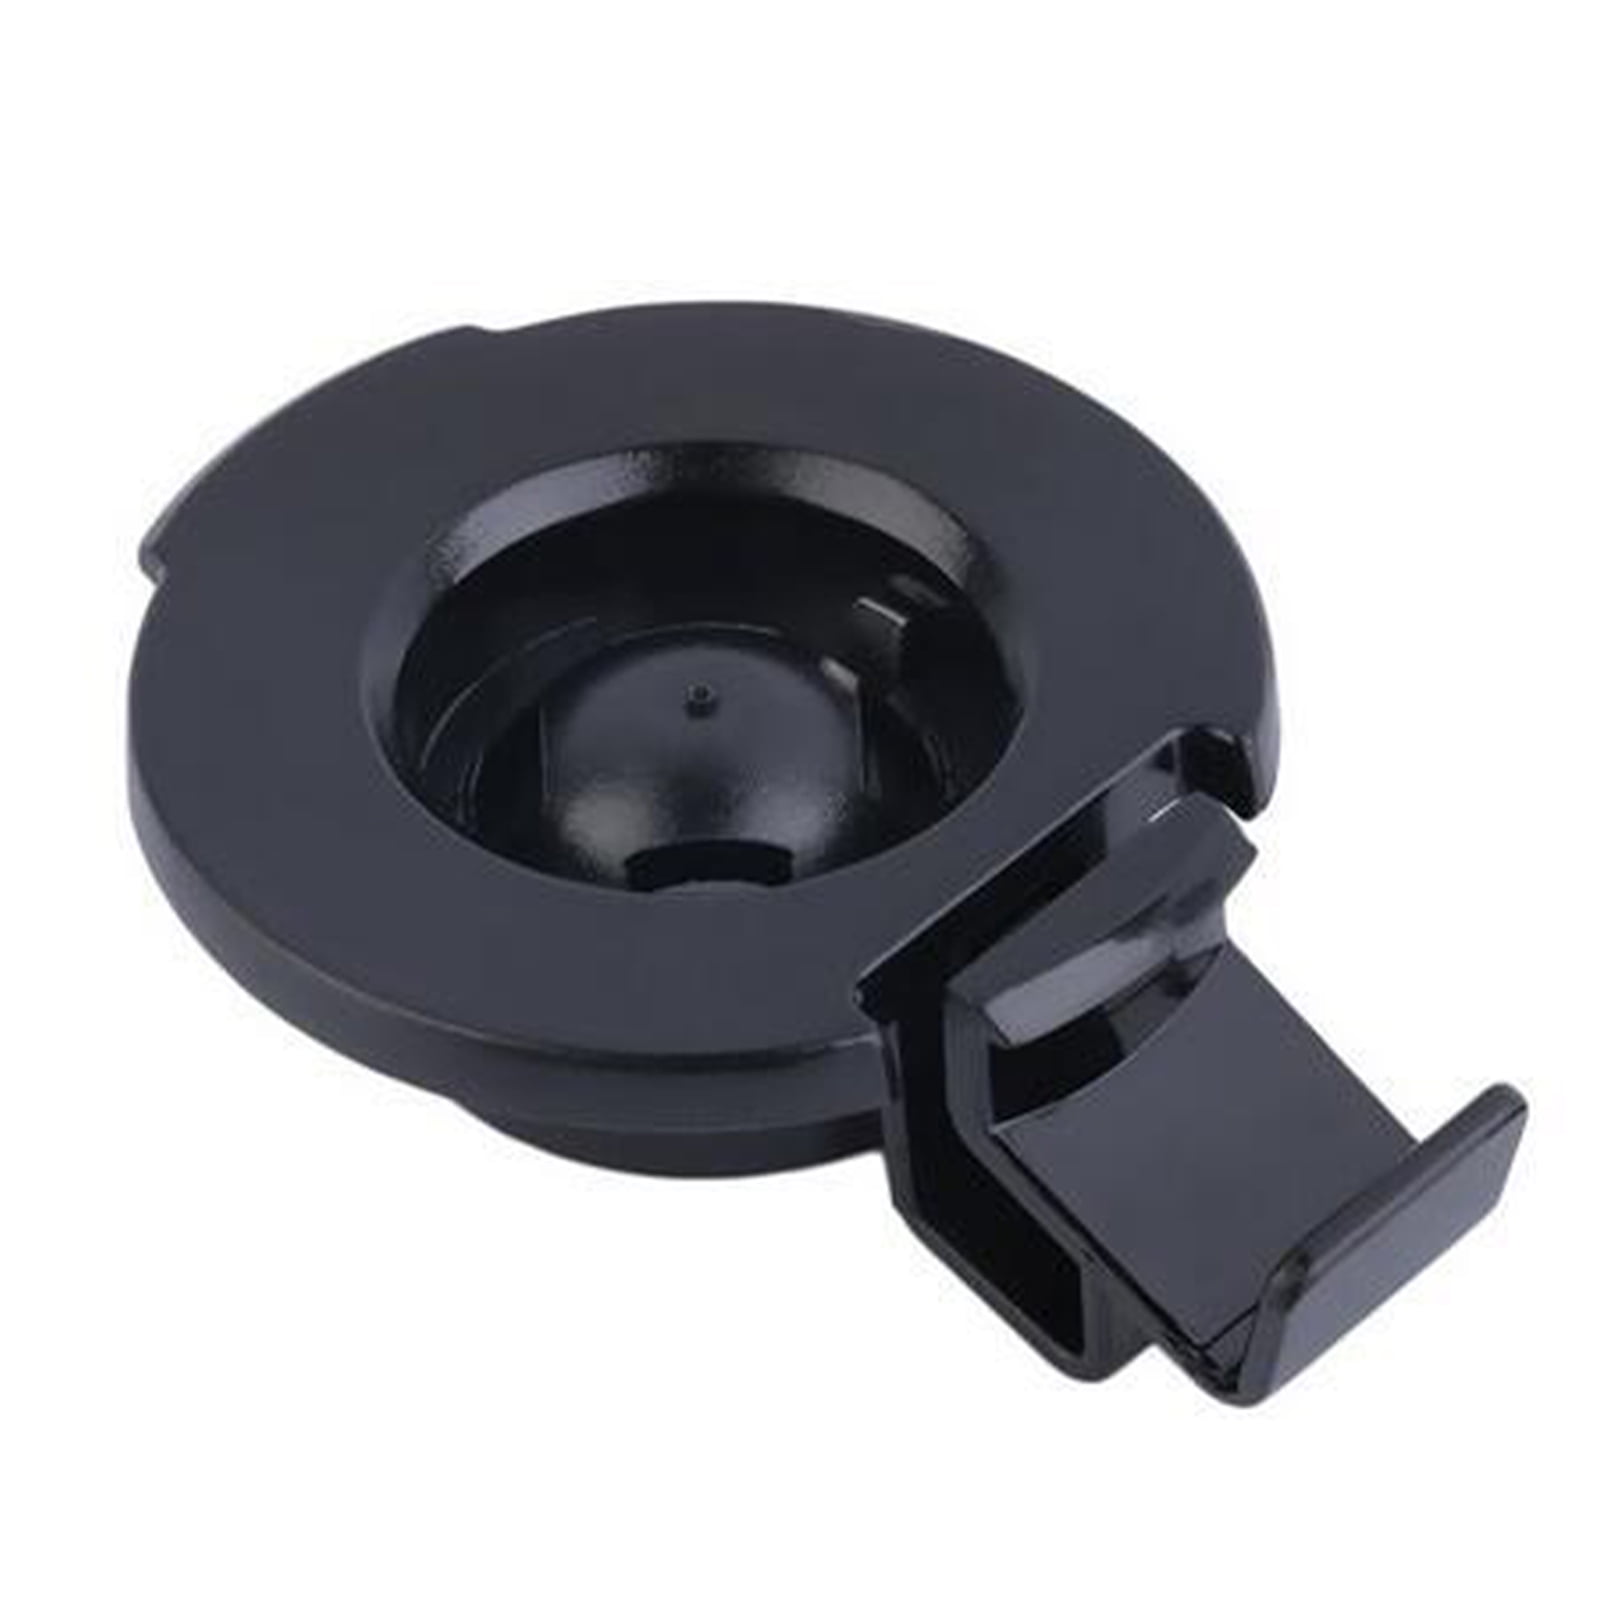 Clip On GPS Replacement Parts Mount For NUVI 2457LMT - Walmart.com